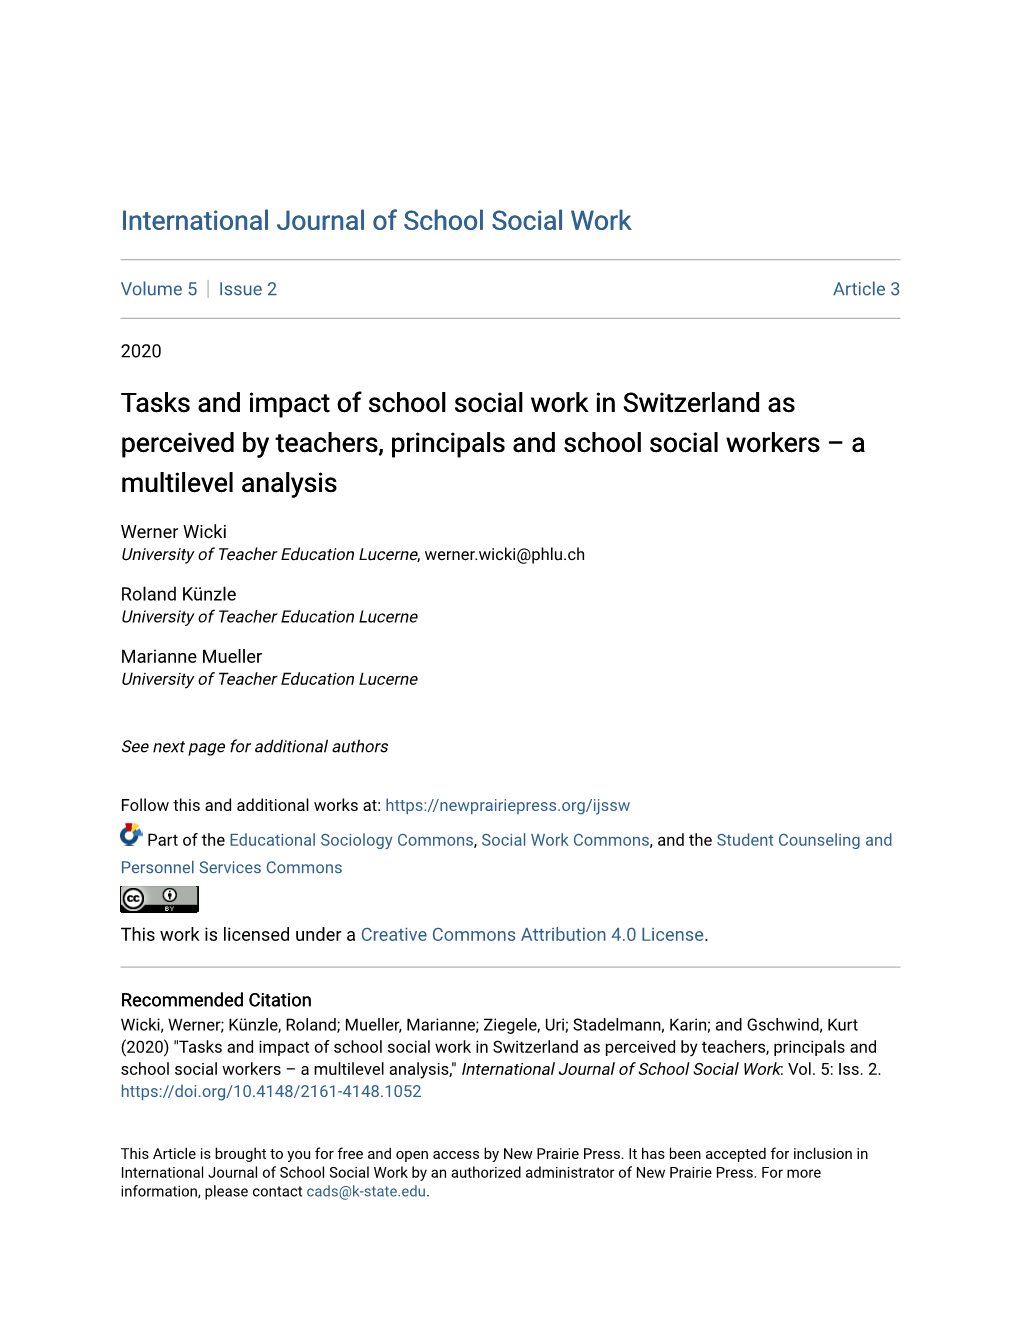 Tasks and Impact of School Social Work in Switzerland As Perceived by Teachers, Principals and School Social Workers – a Multilevel Analysis